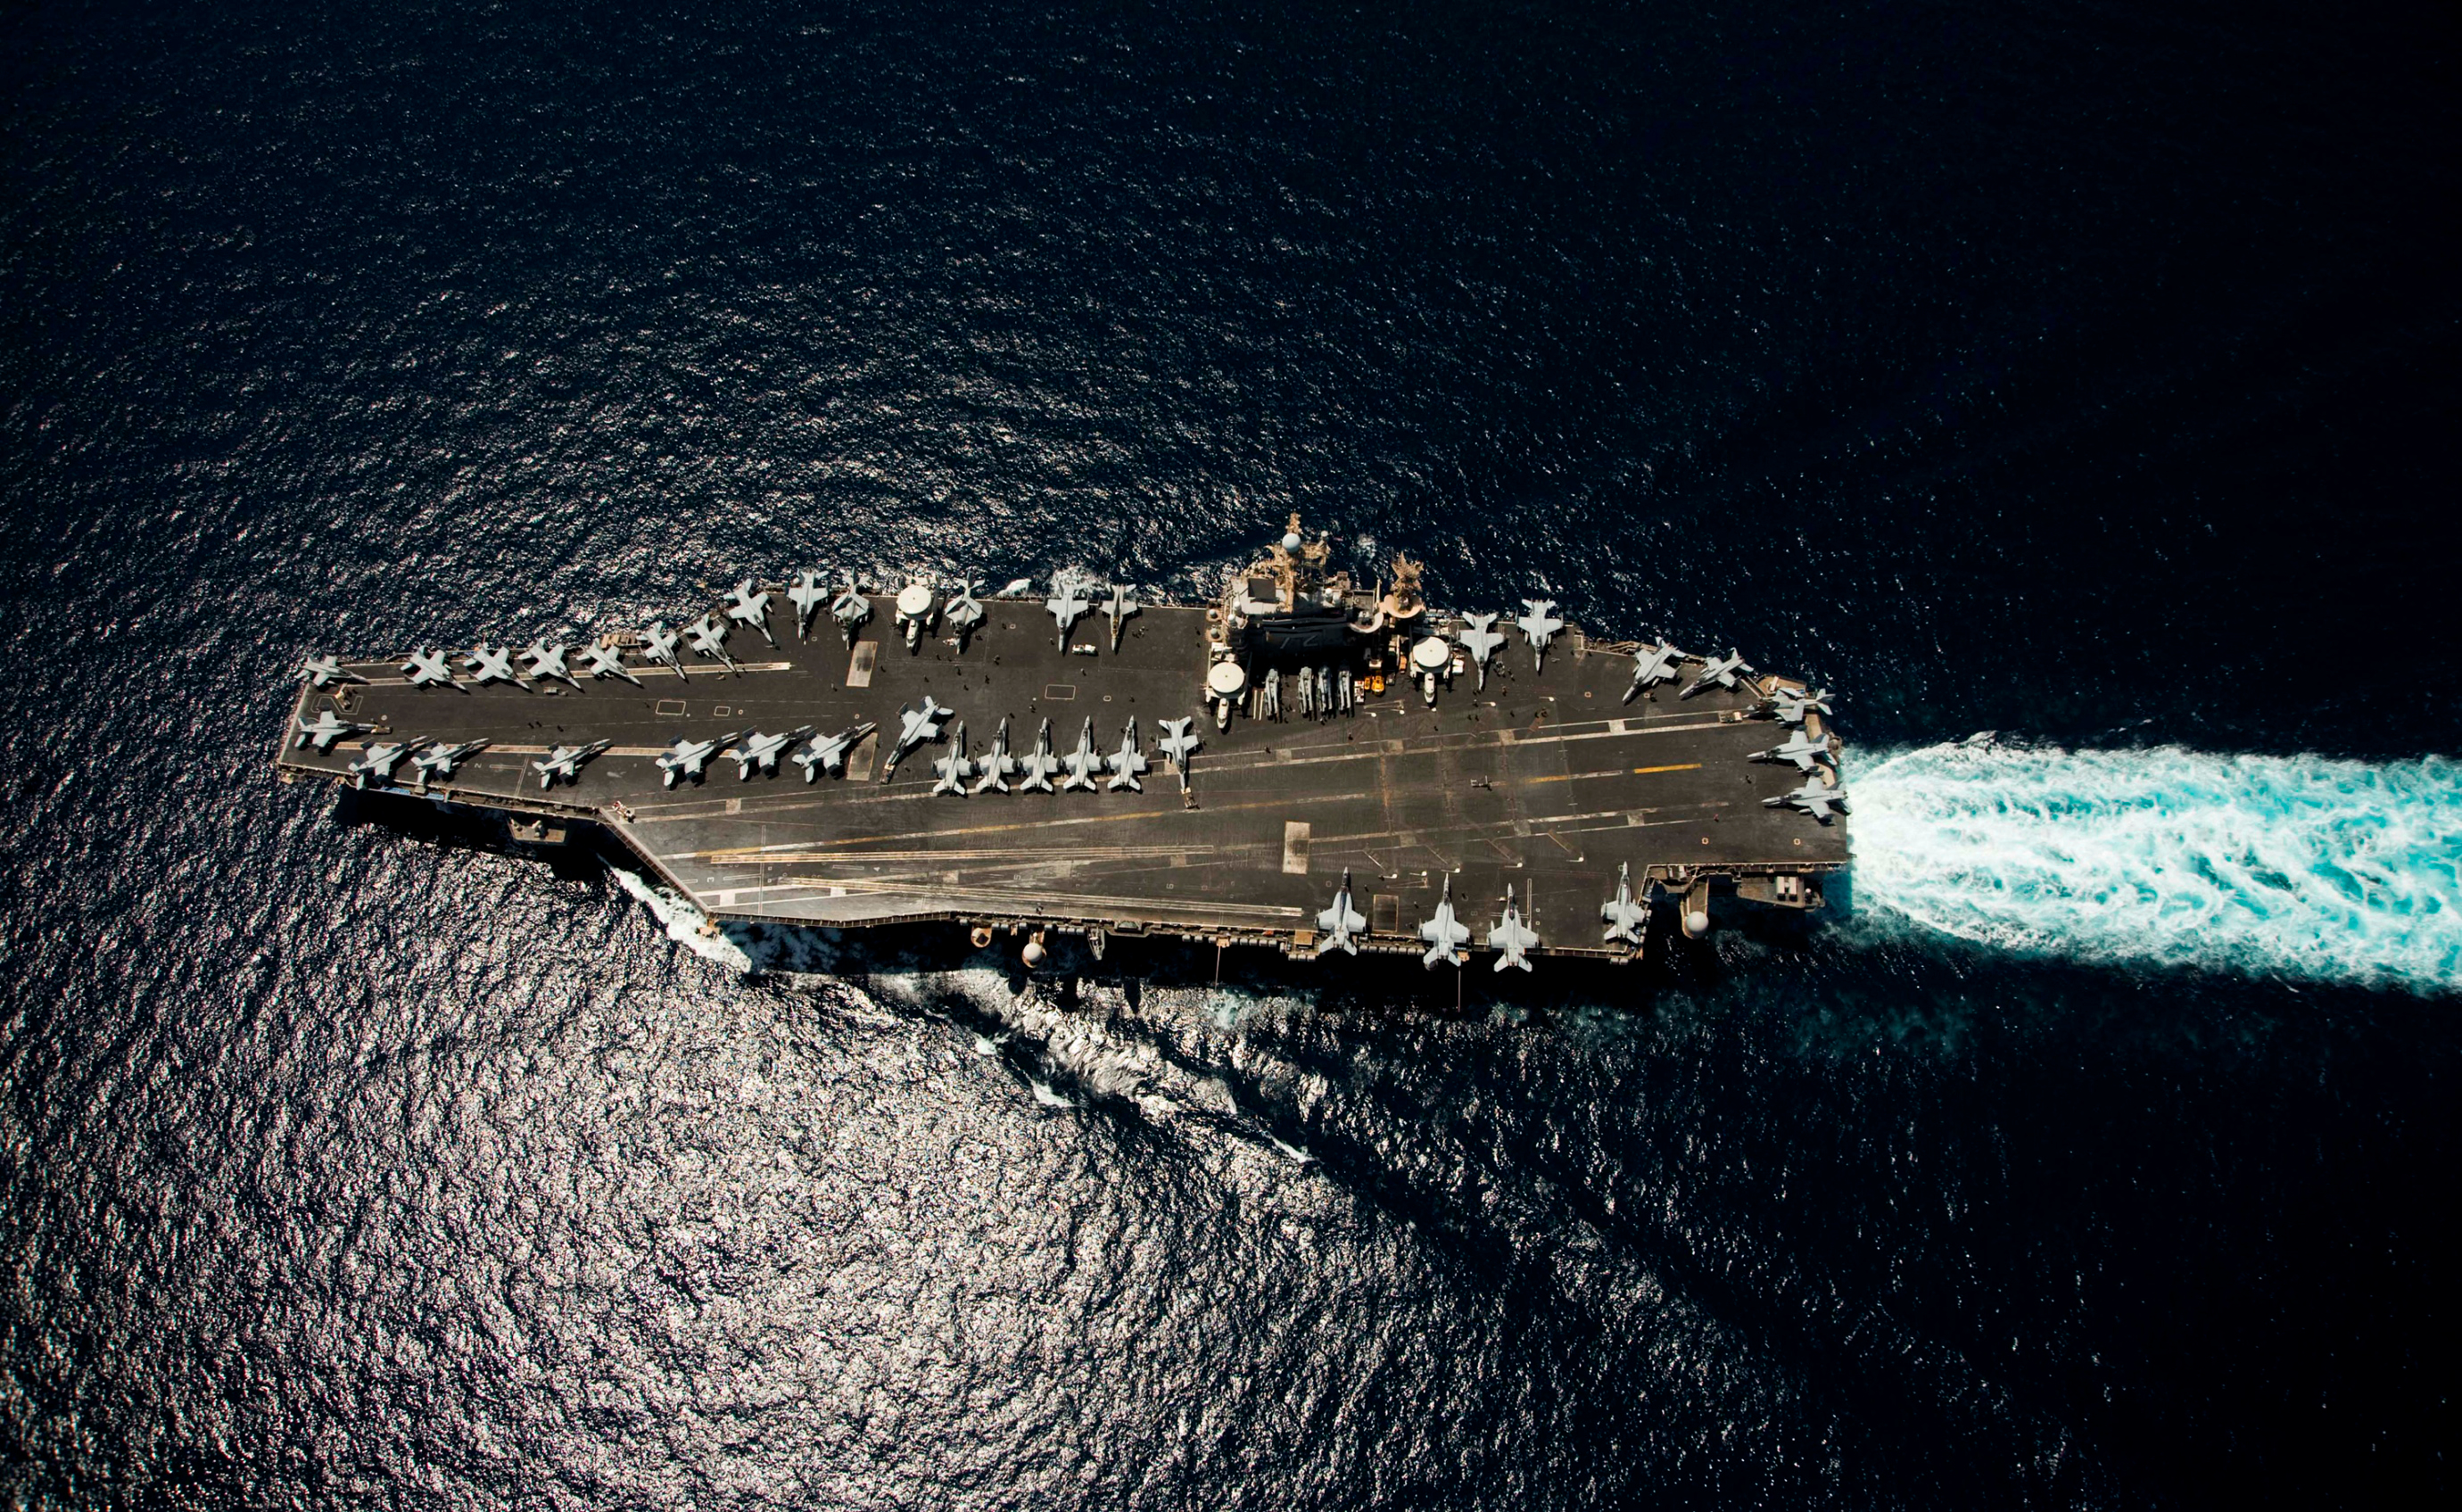 military, uss abraham lincoln (cvn 72), aircraft carrier, warship, warships